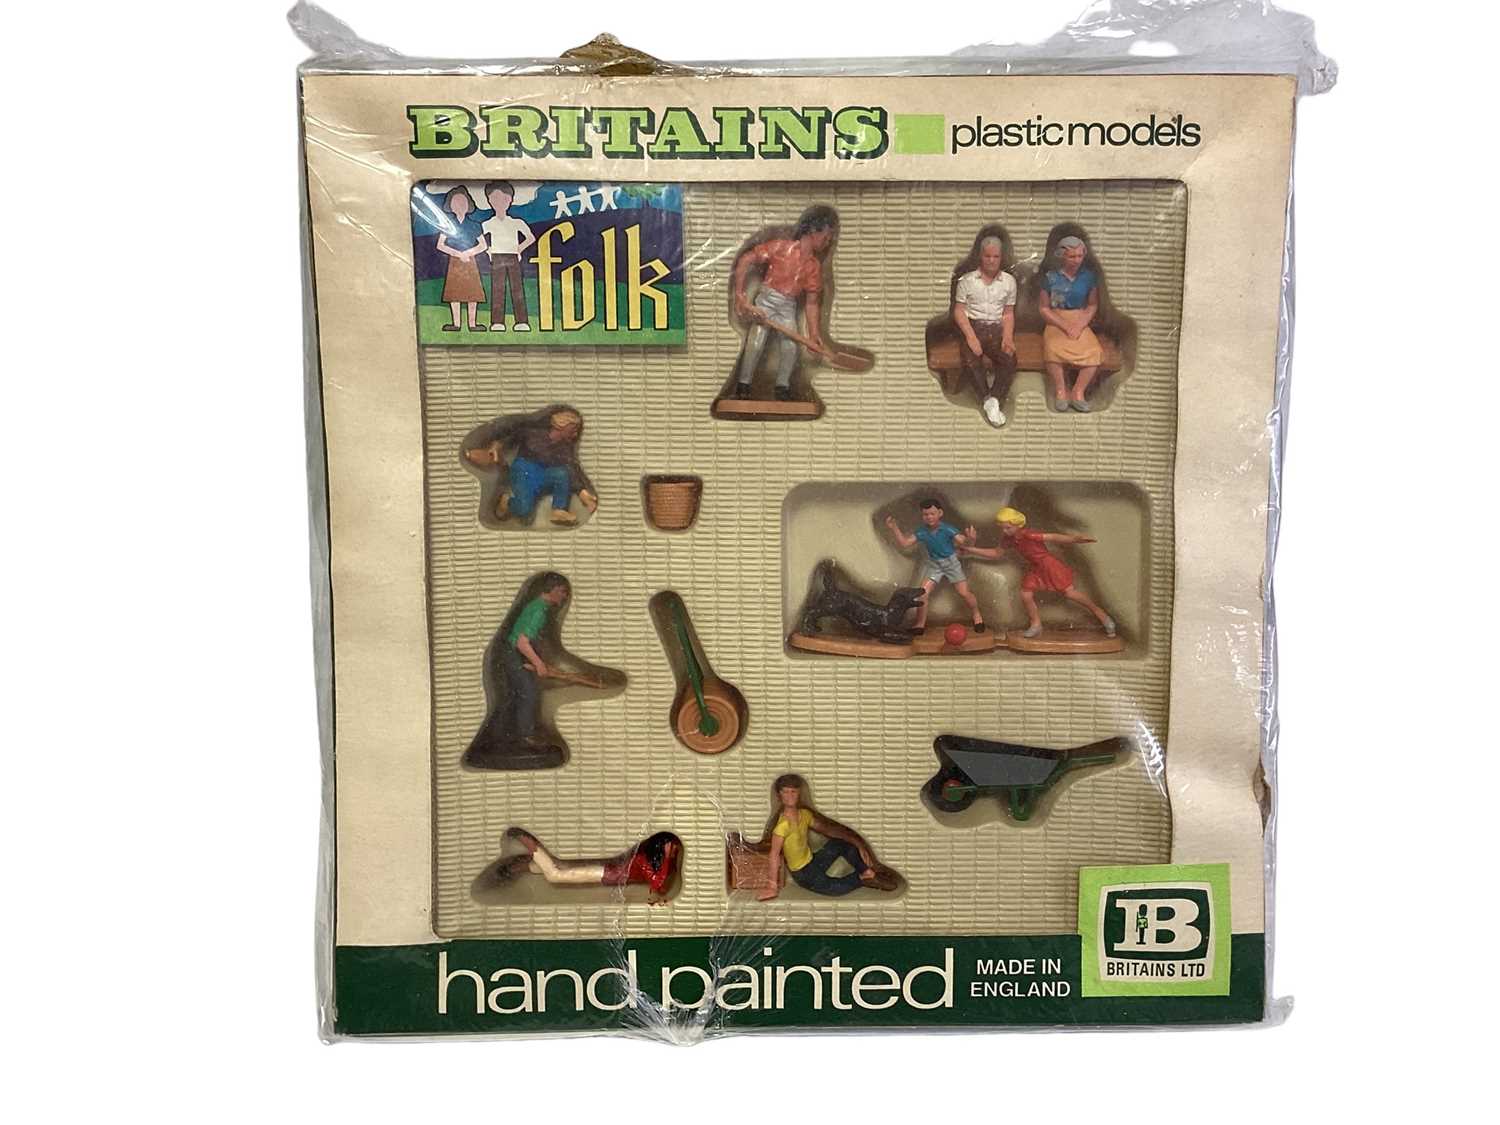 Lot 219 - Britains Hand Paint plastic figures Folk, in window box No.7530, plus Farmyard Cows (x2) and Make-Up Card Models No.4751 (x2), (5 total)